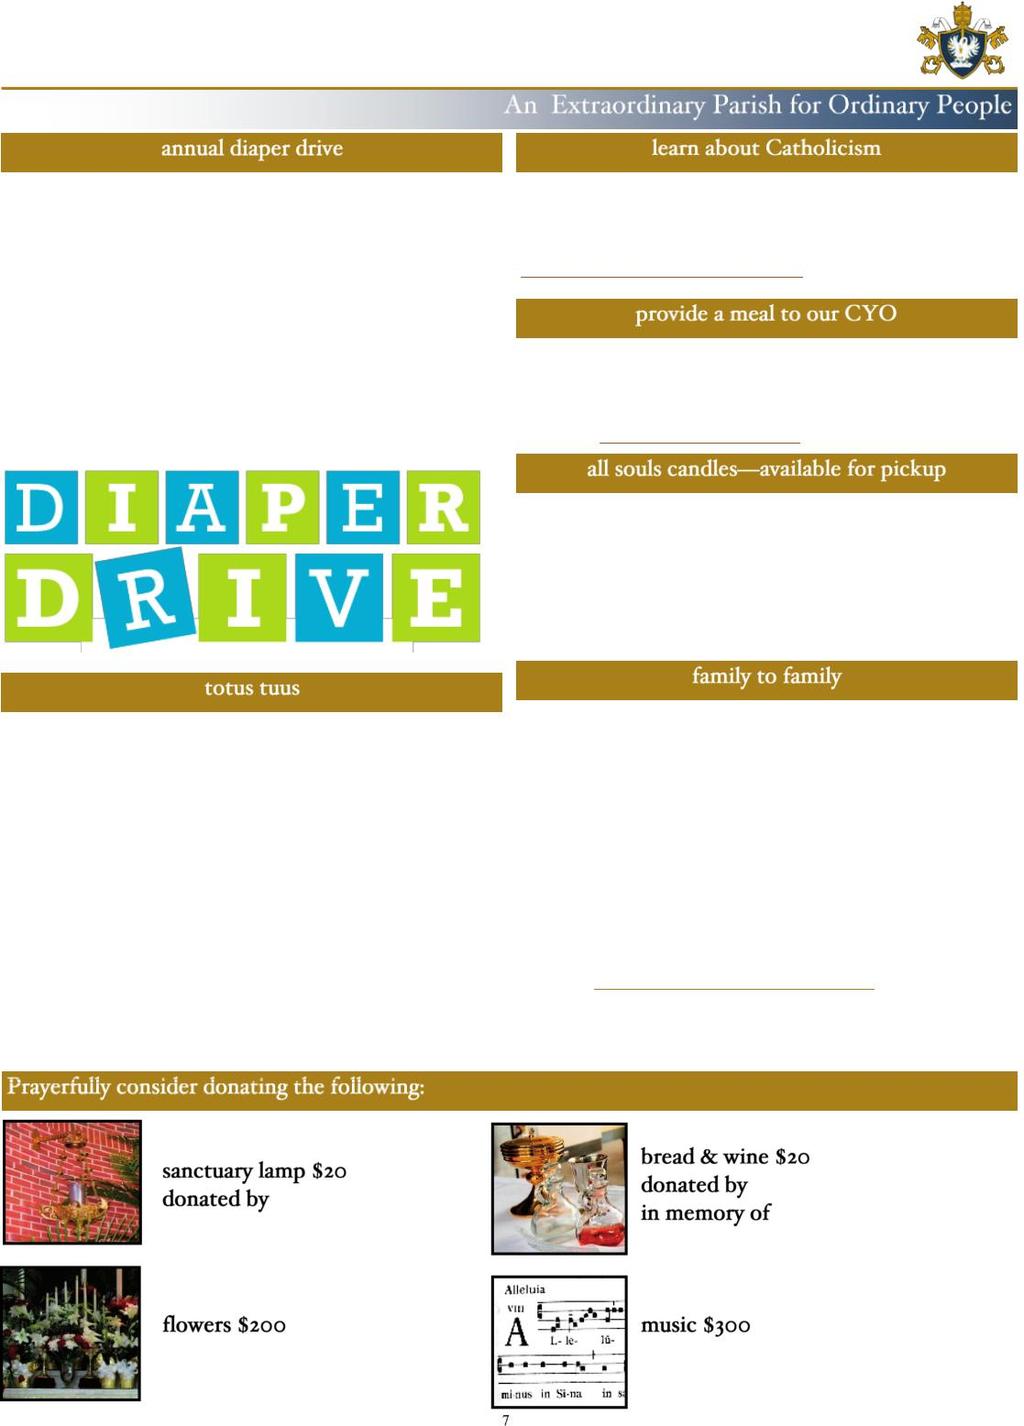 Happenings & Needs During the month of January, we will have our annual Diaper Drive benefiting Birthright of Greenville.